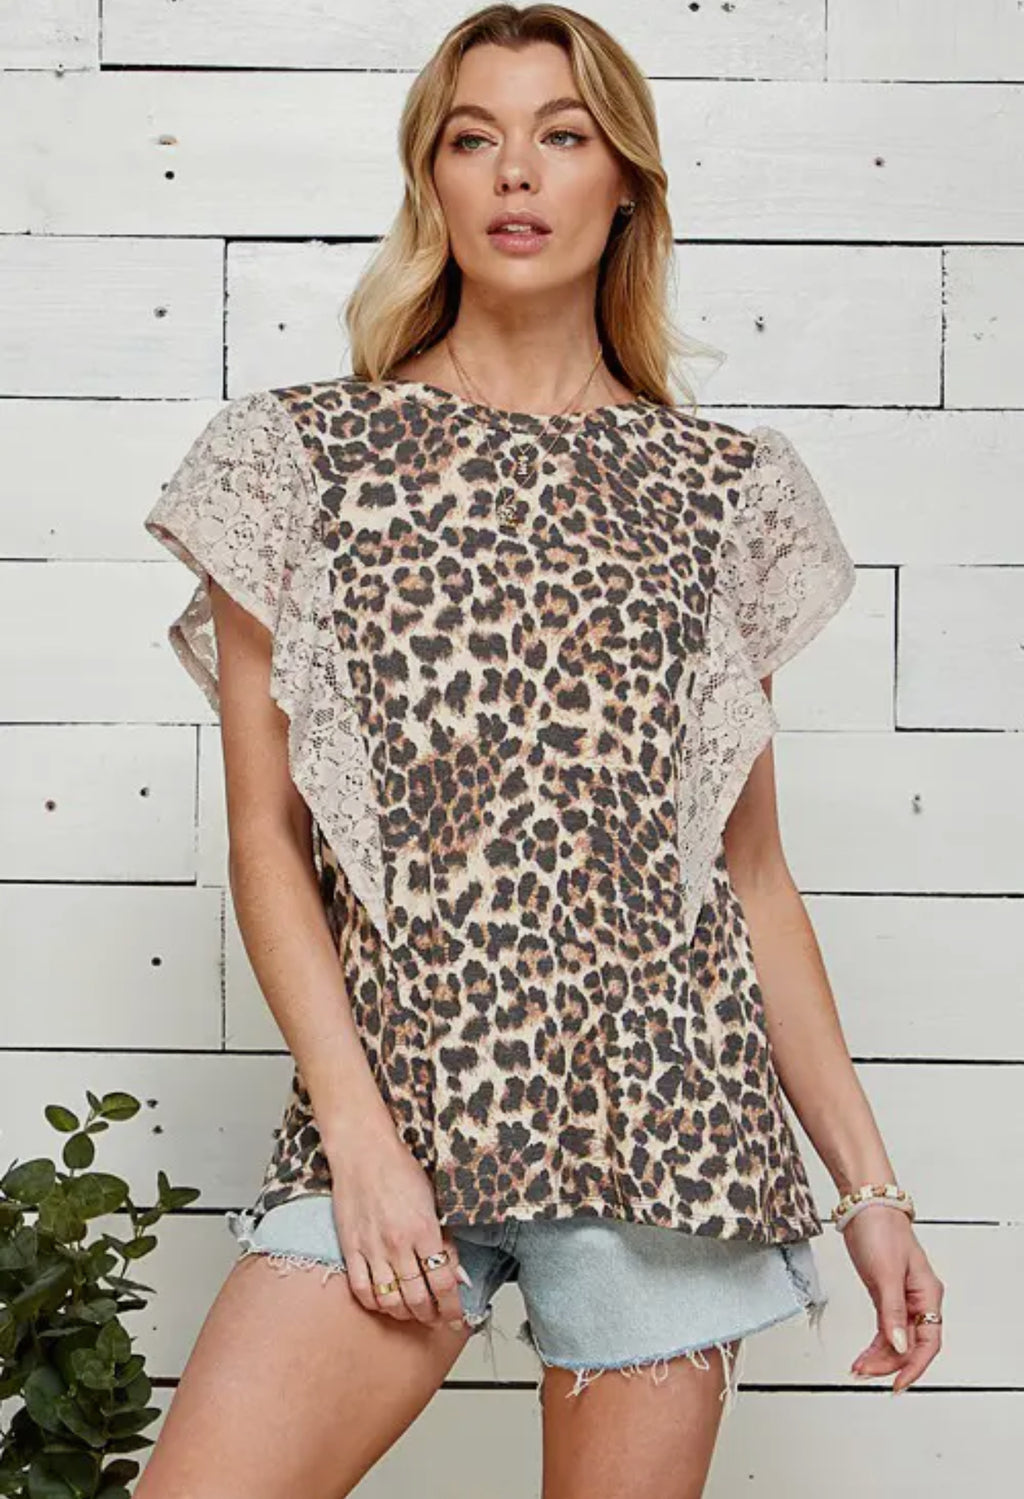 Leopard Print Top With Ruffled Lace Short Sleeve Top - Lil Monkey Boutique